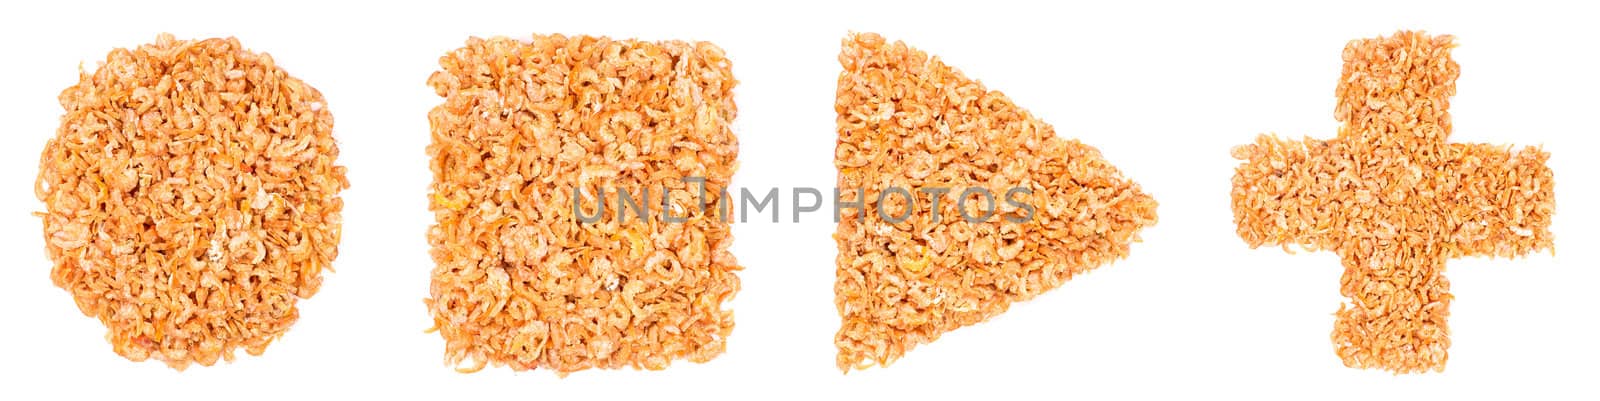 Geometrical figures made of dried shrimps, isolated on a white background